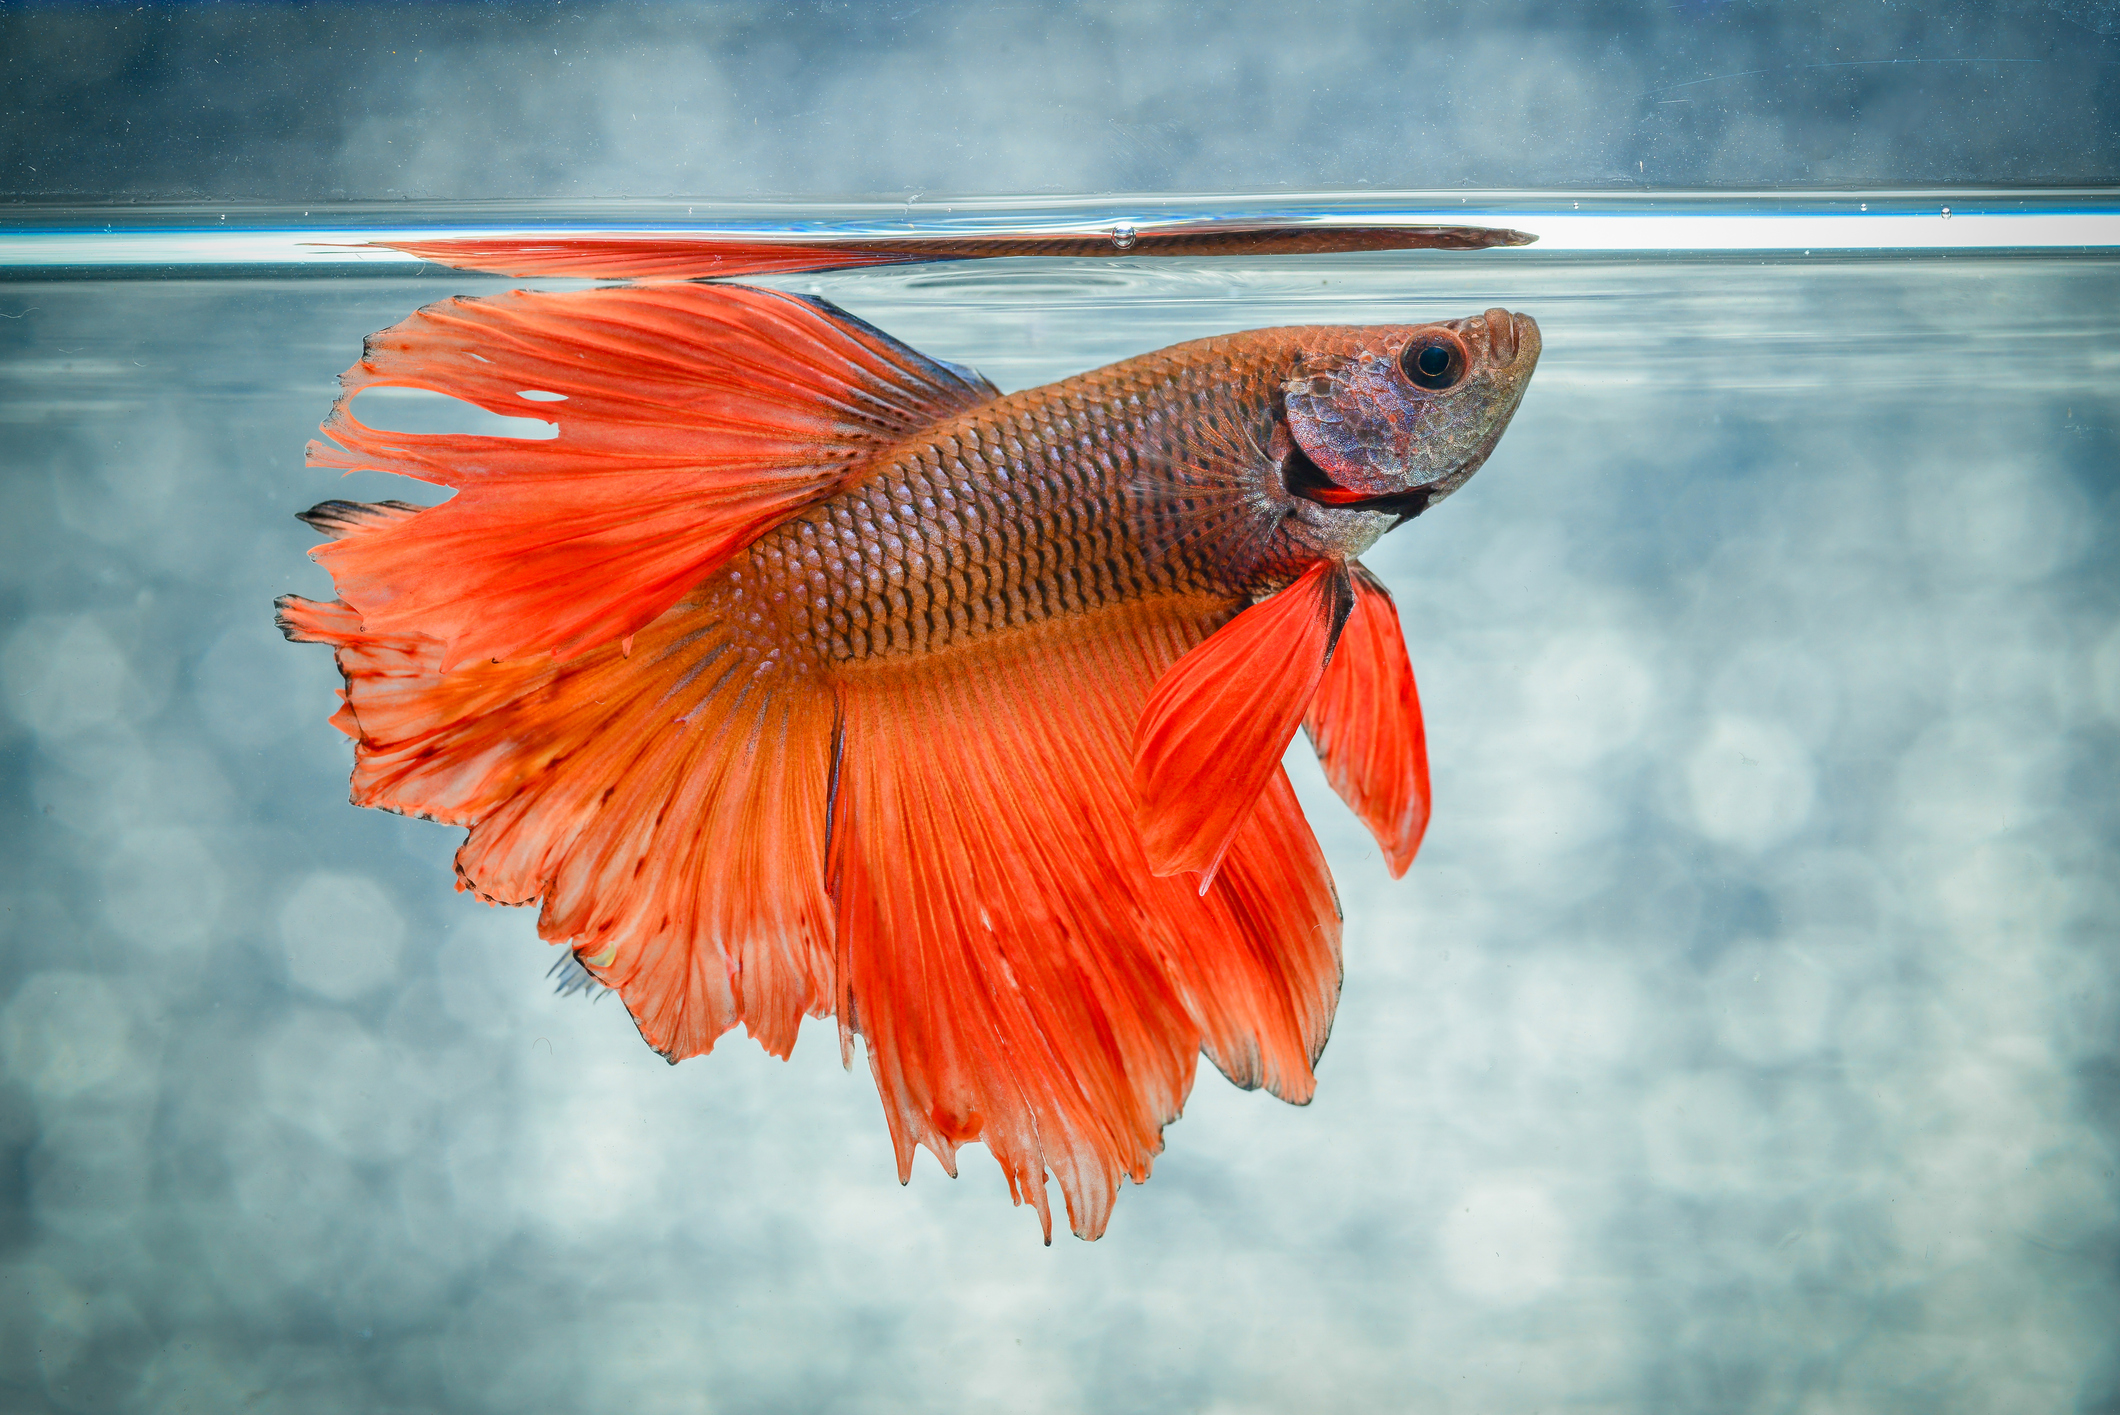 <p>  Bettas are great pets, but they're especially aggressive and territorial. If you're considering adding a betta to your tank, do your research and <a href="https://www.lovetoknowpets.com/aquariums/great-betta-fish-tank-mates" title="10 Perfect Tank Mates for Your Betta (& 5 Species to Avoid)">get a fish companion they're likely to get along with</a>.  </p> <blockquote><h3>Fast Fact</h3><p>    Contrary to popular belief, never put your betta in a bowl or some sort of mini tank. They are hardy, but thrive in a ten gallon aquarium or larger. Show your betta the same love and space you'd show any other fish.   </p></blockquote>